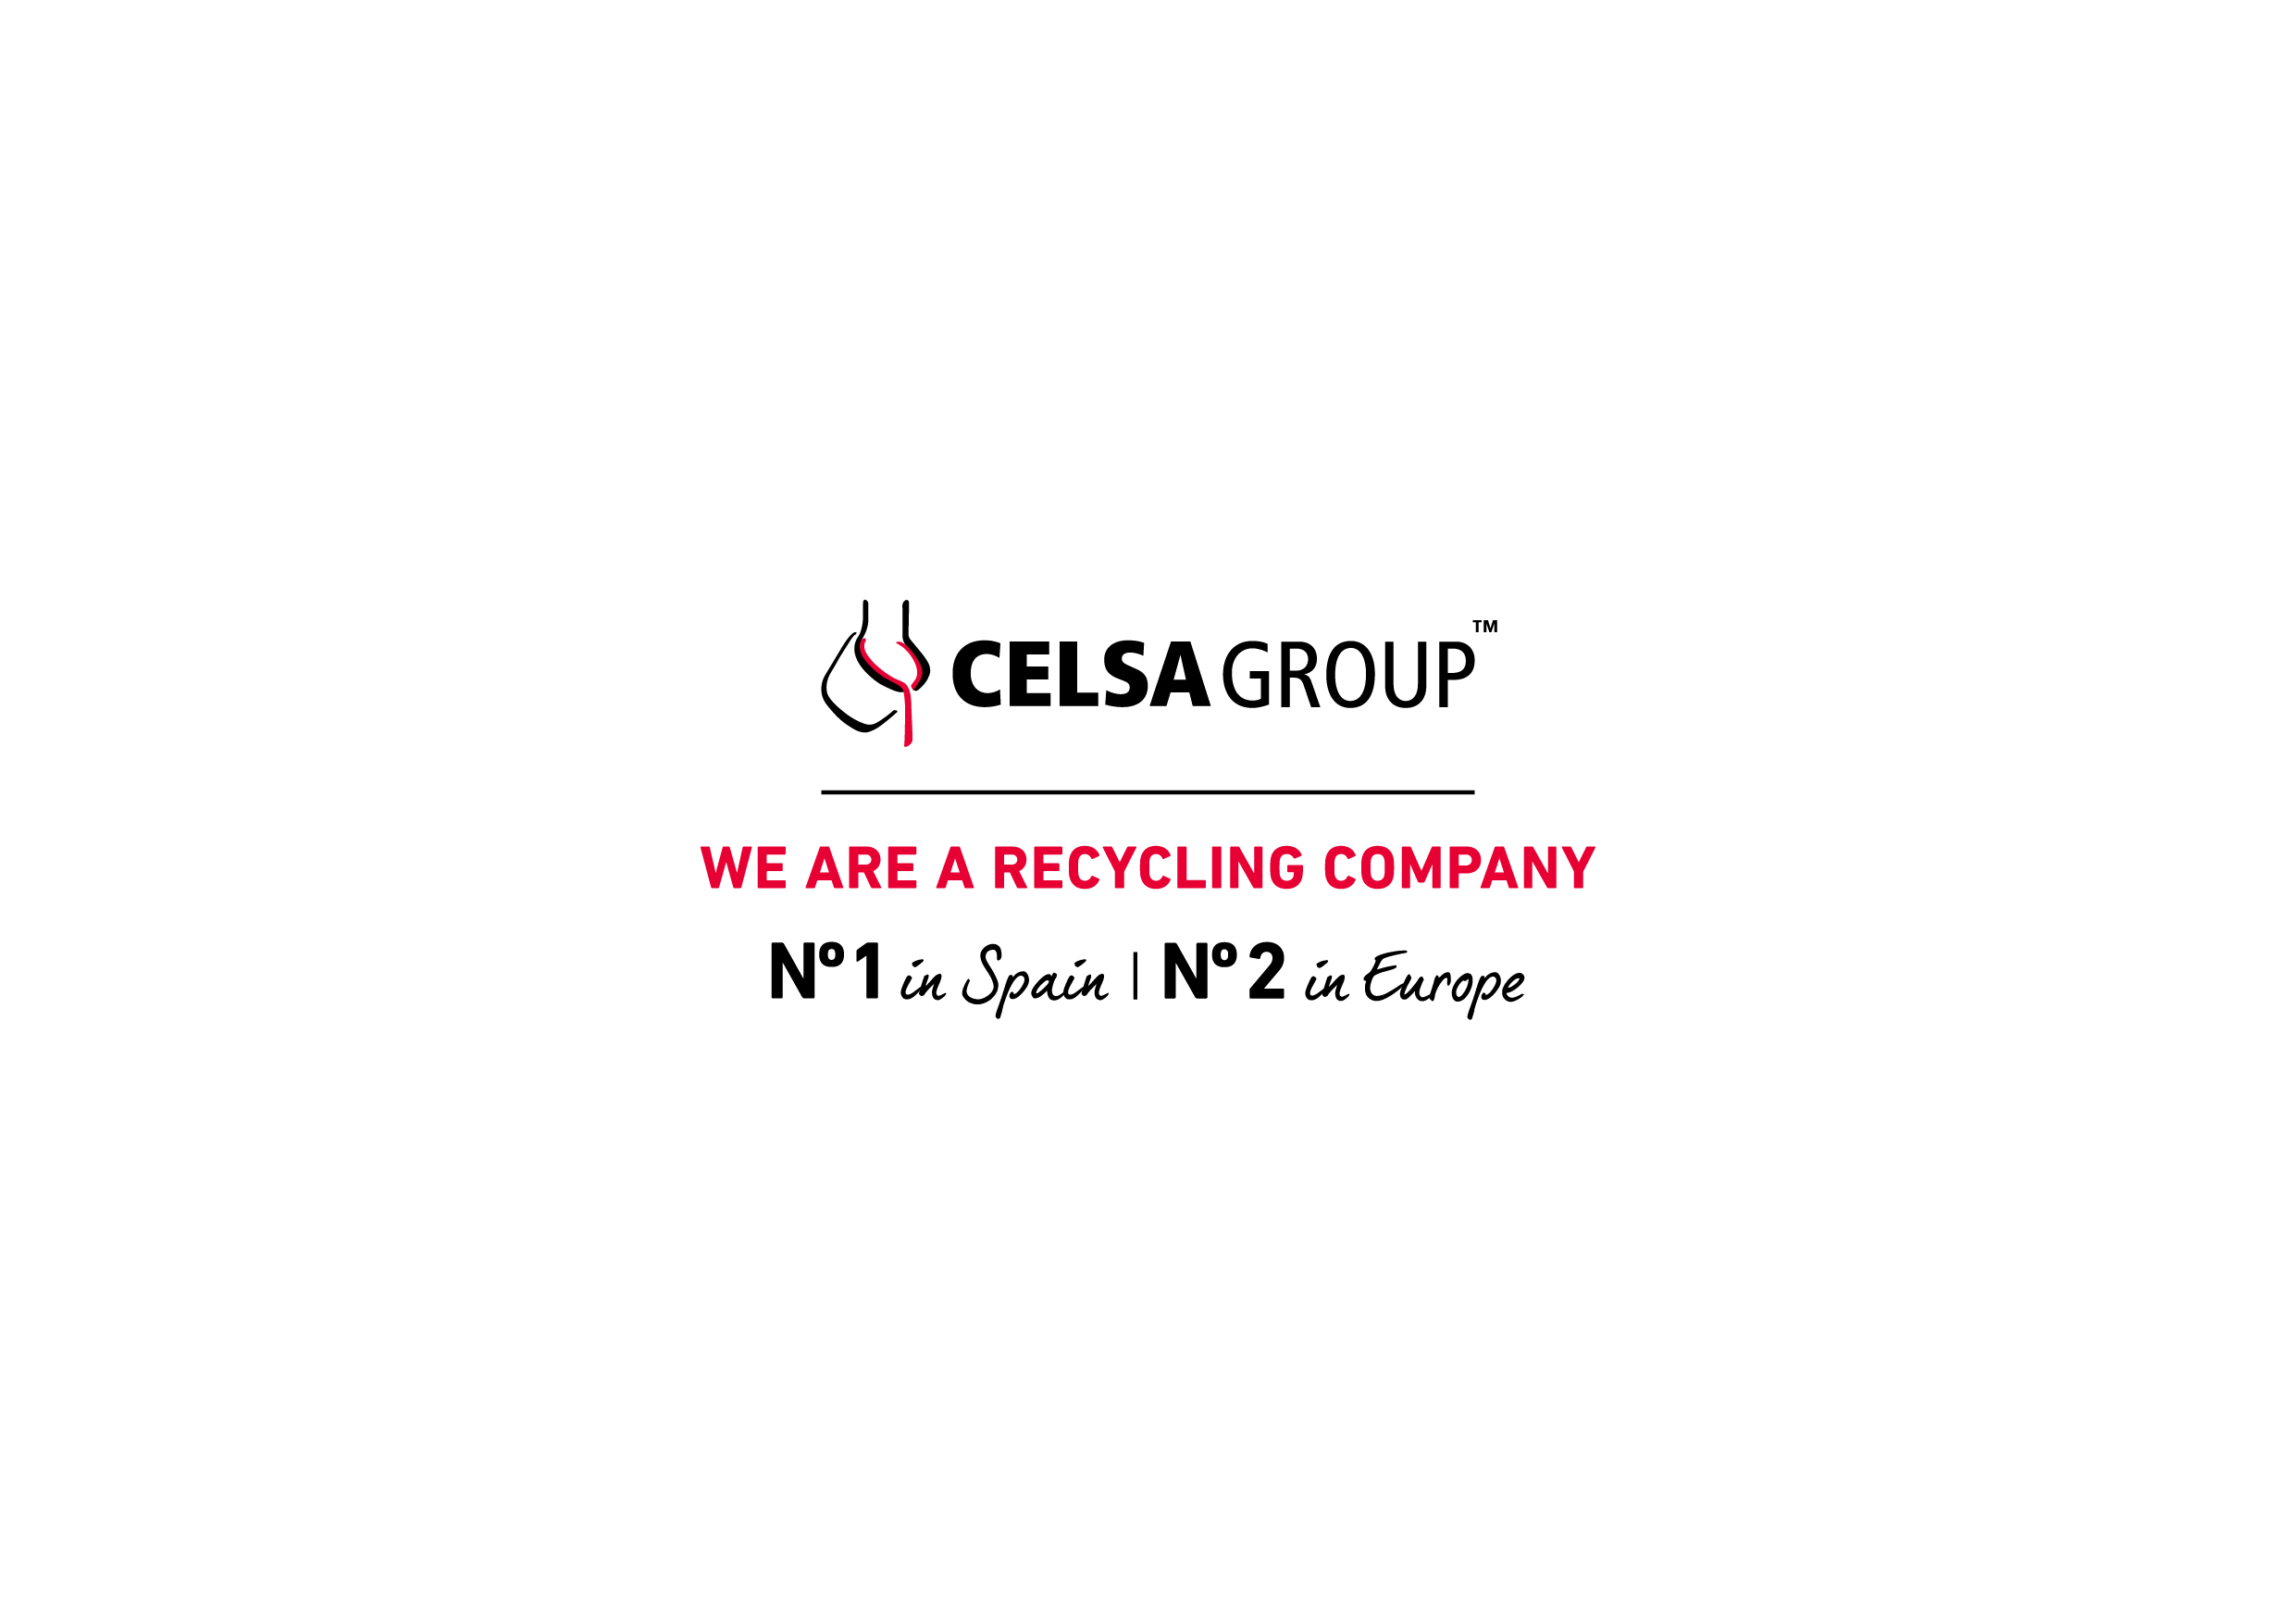 CELSA Group we are a recycling company